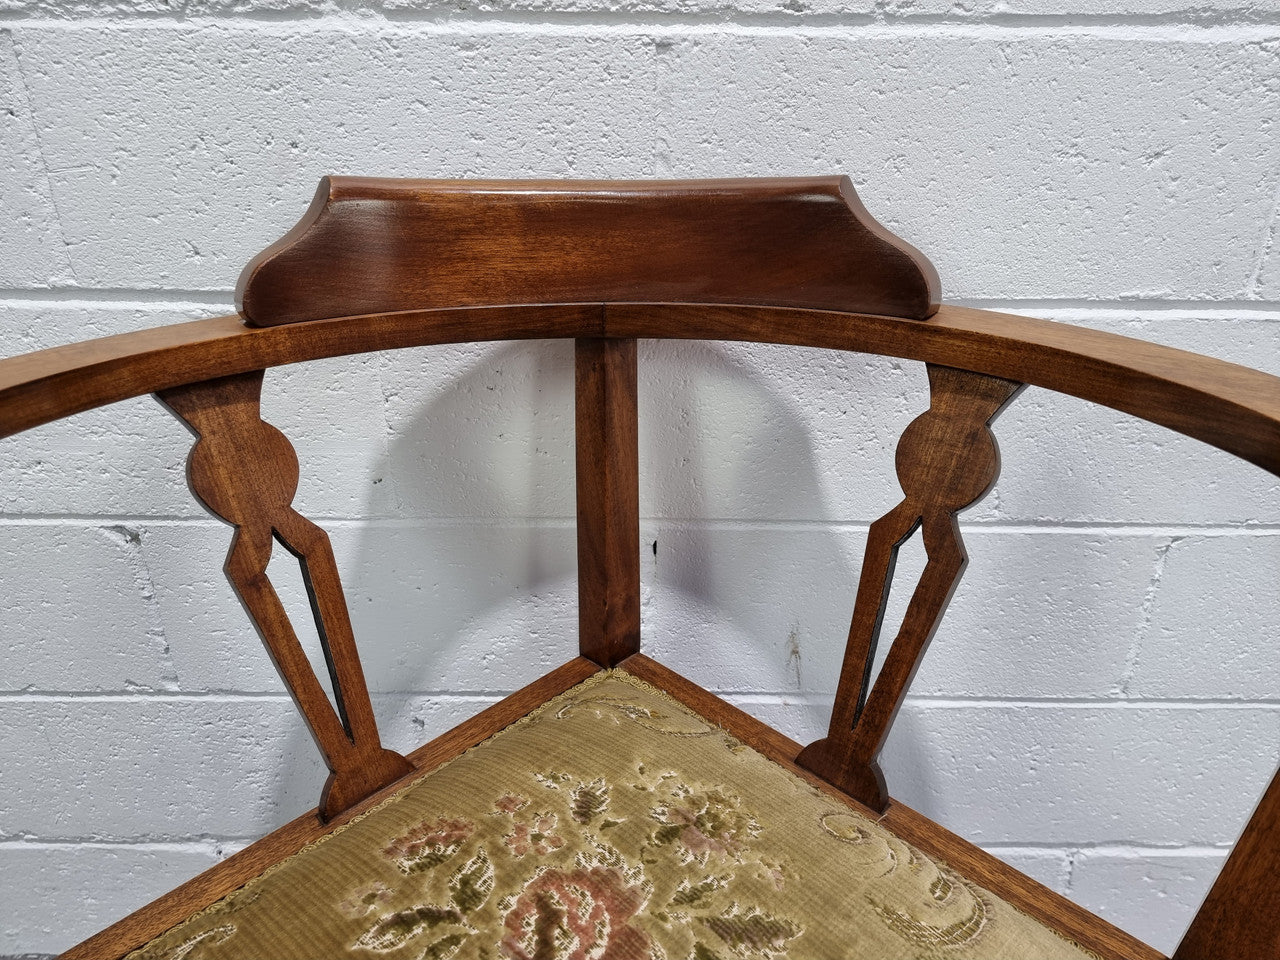 Mahogany upsholstered corner chair. It is in good original condition with clean upholstery.